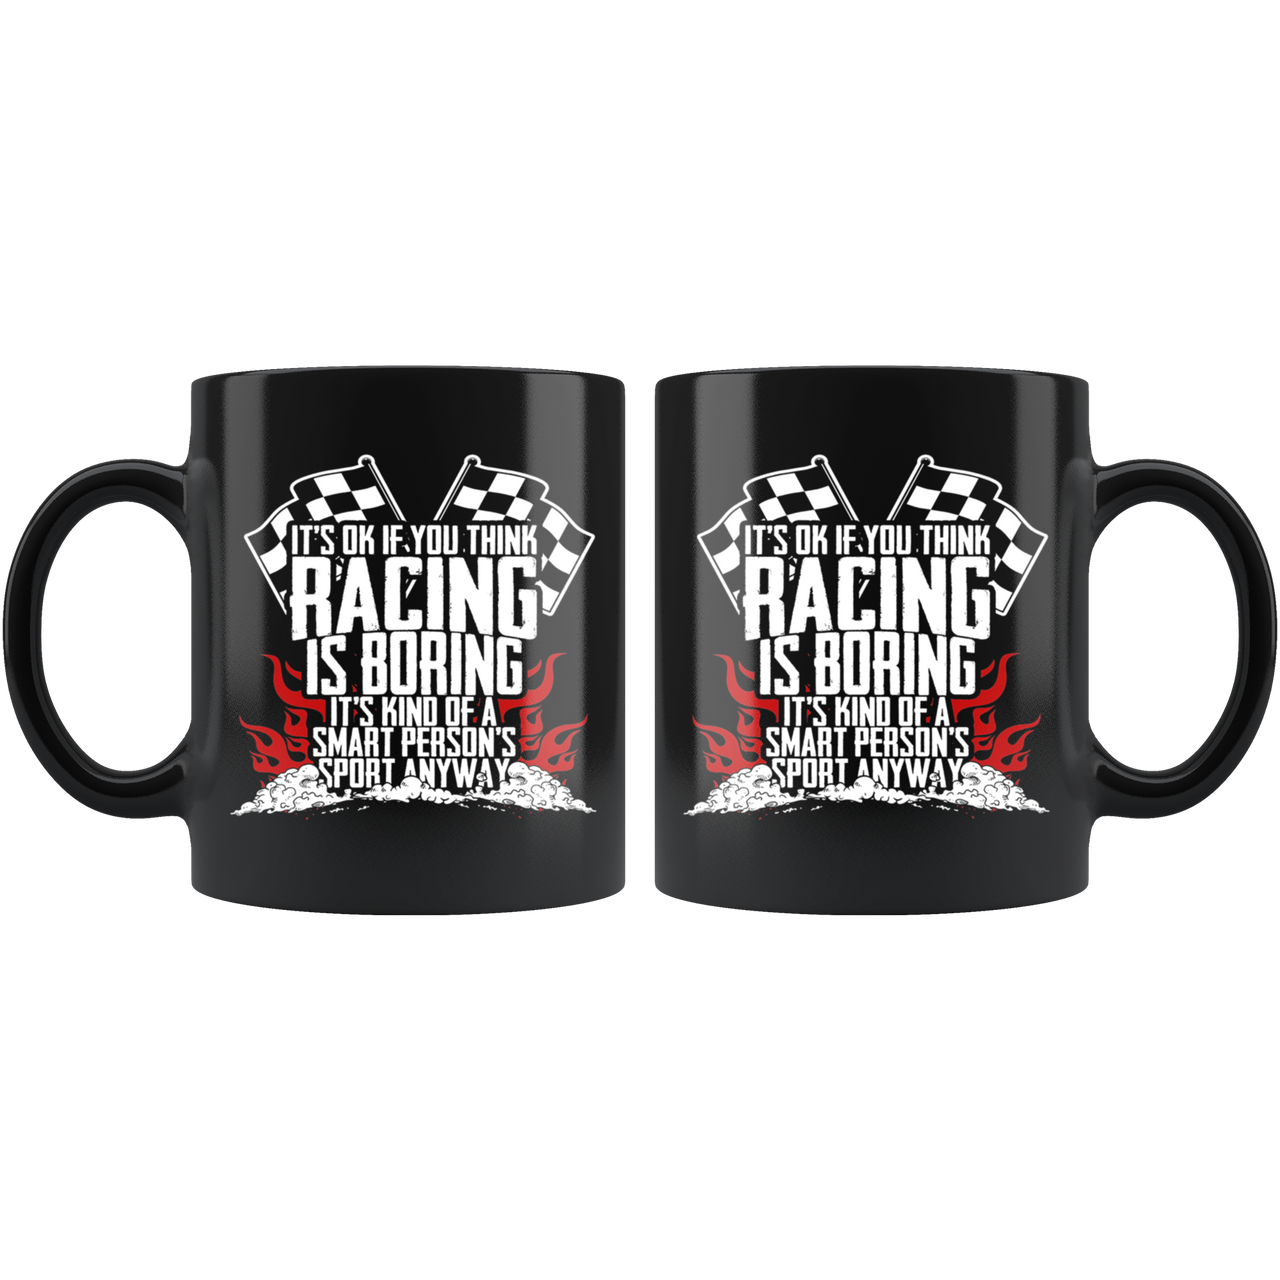 It's Okay If You Think Racing Is Boring It's Kind Of A Smart Person's Sport Anyway Mug!